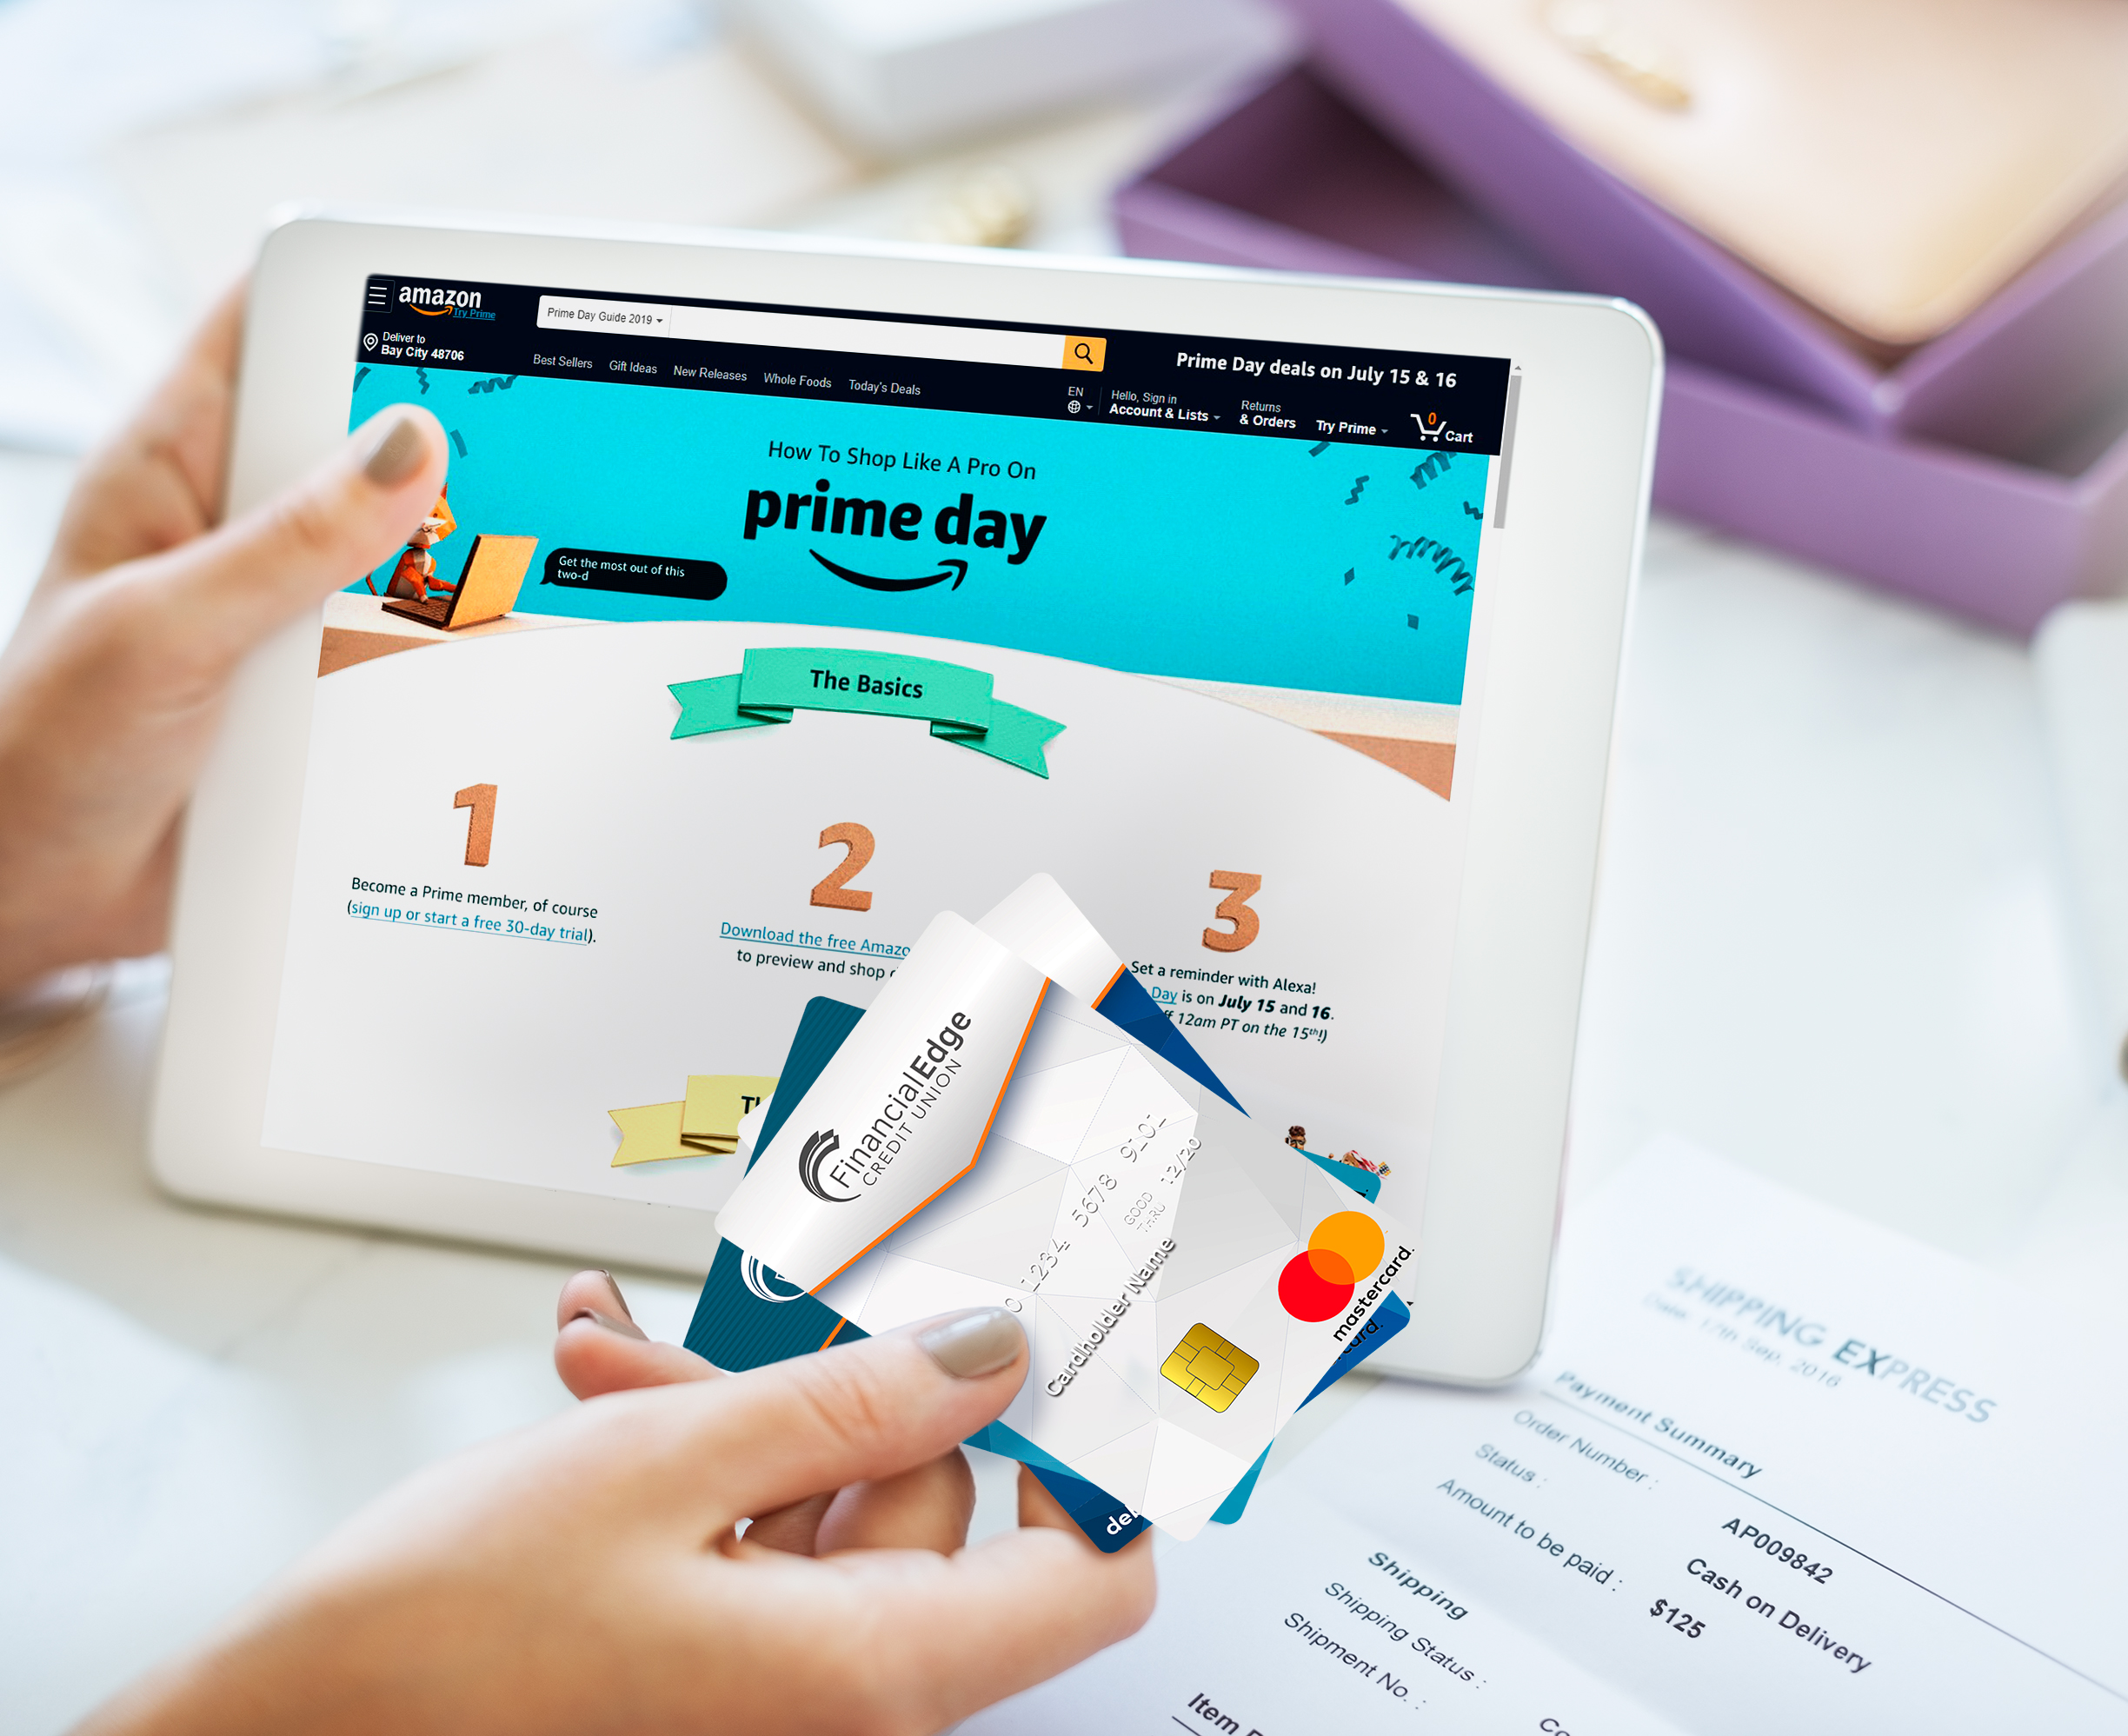 Use your FinancialEdge credit or debit card on Amazon Prime Day for a chance to win an $100 Amazon gift card!